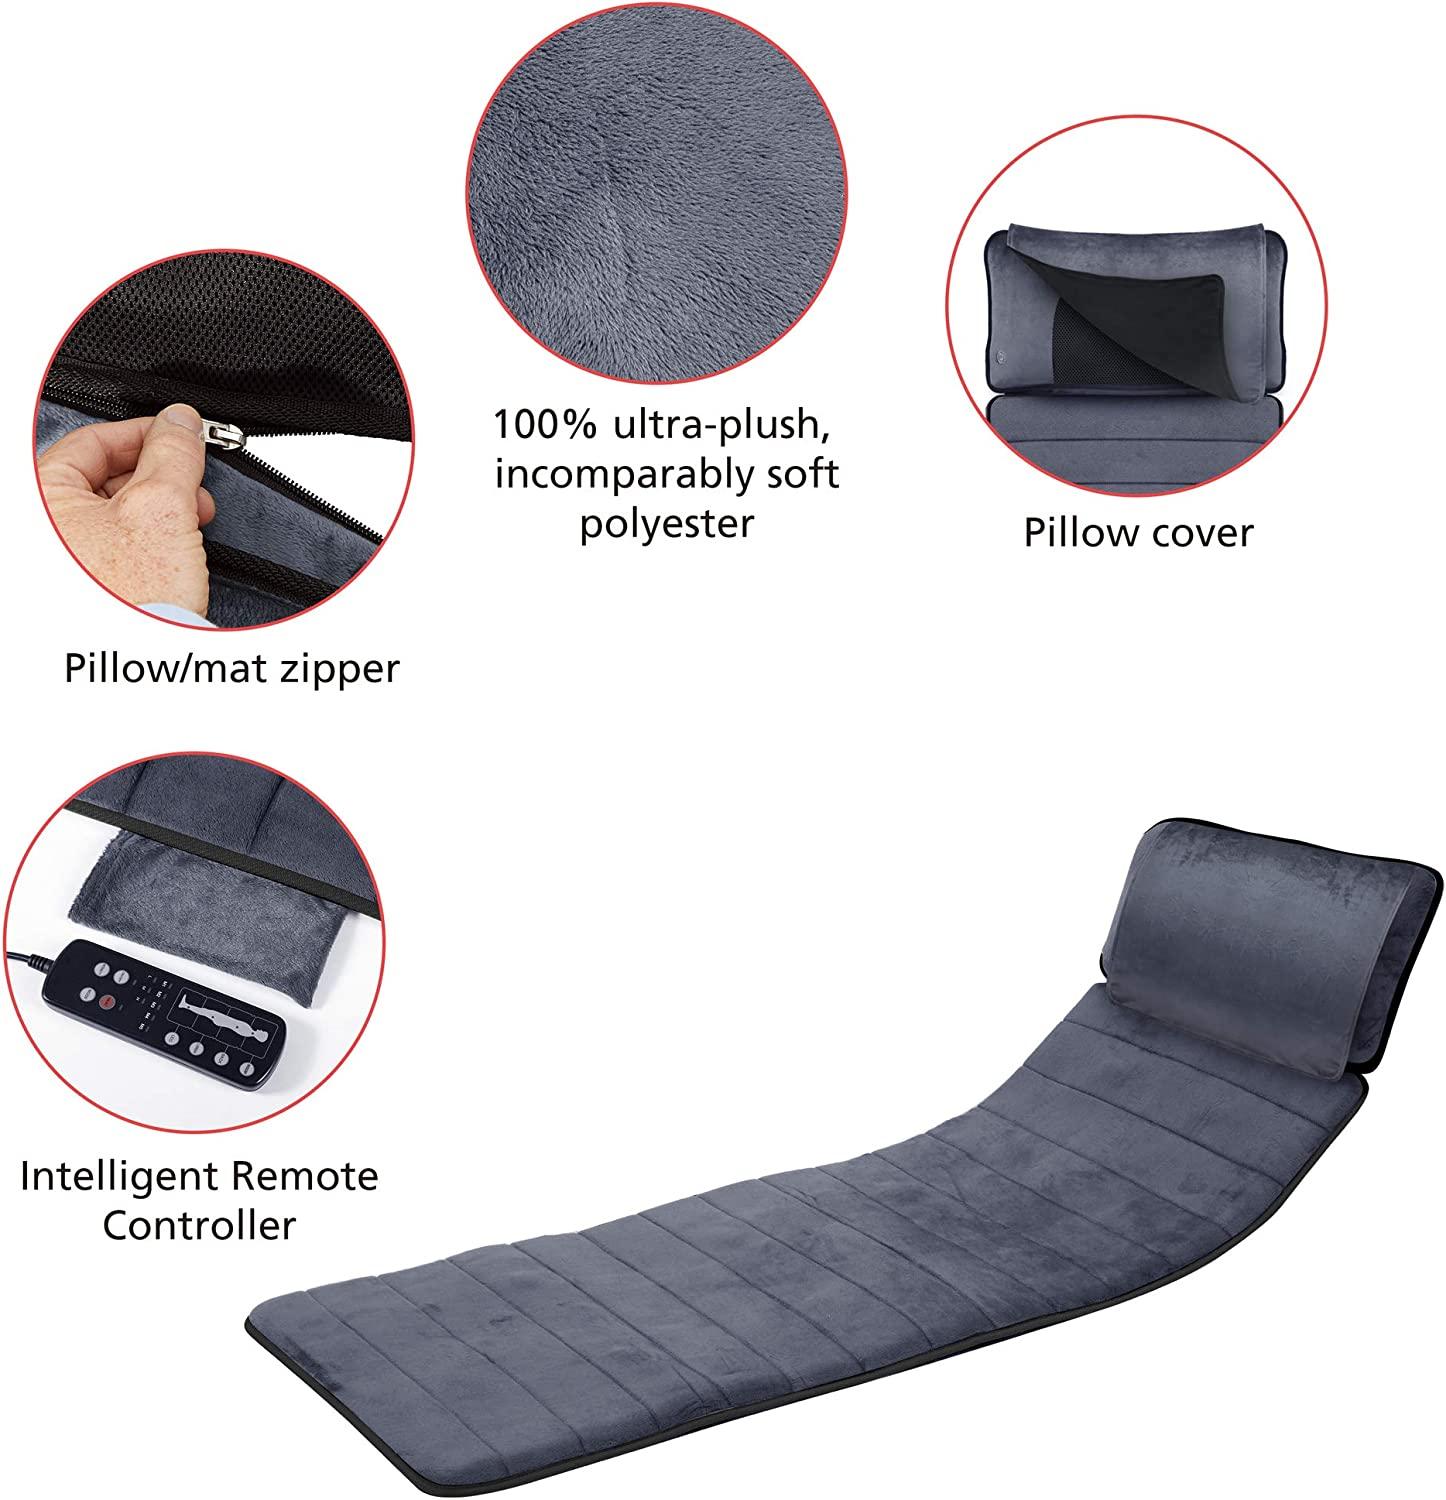 Comfier Massage Mat, Full Body Heating Massage Pad with Movable